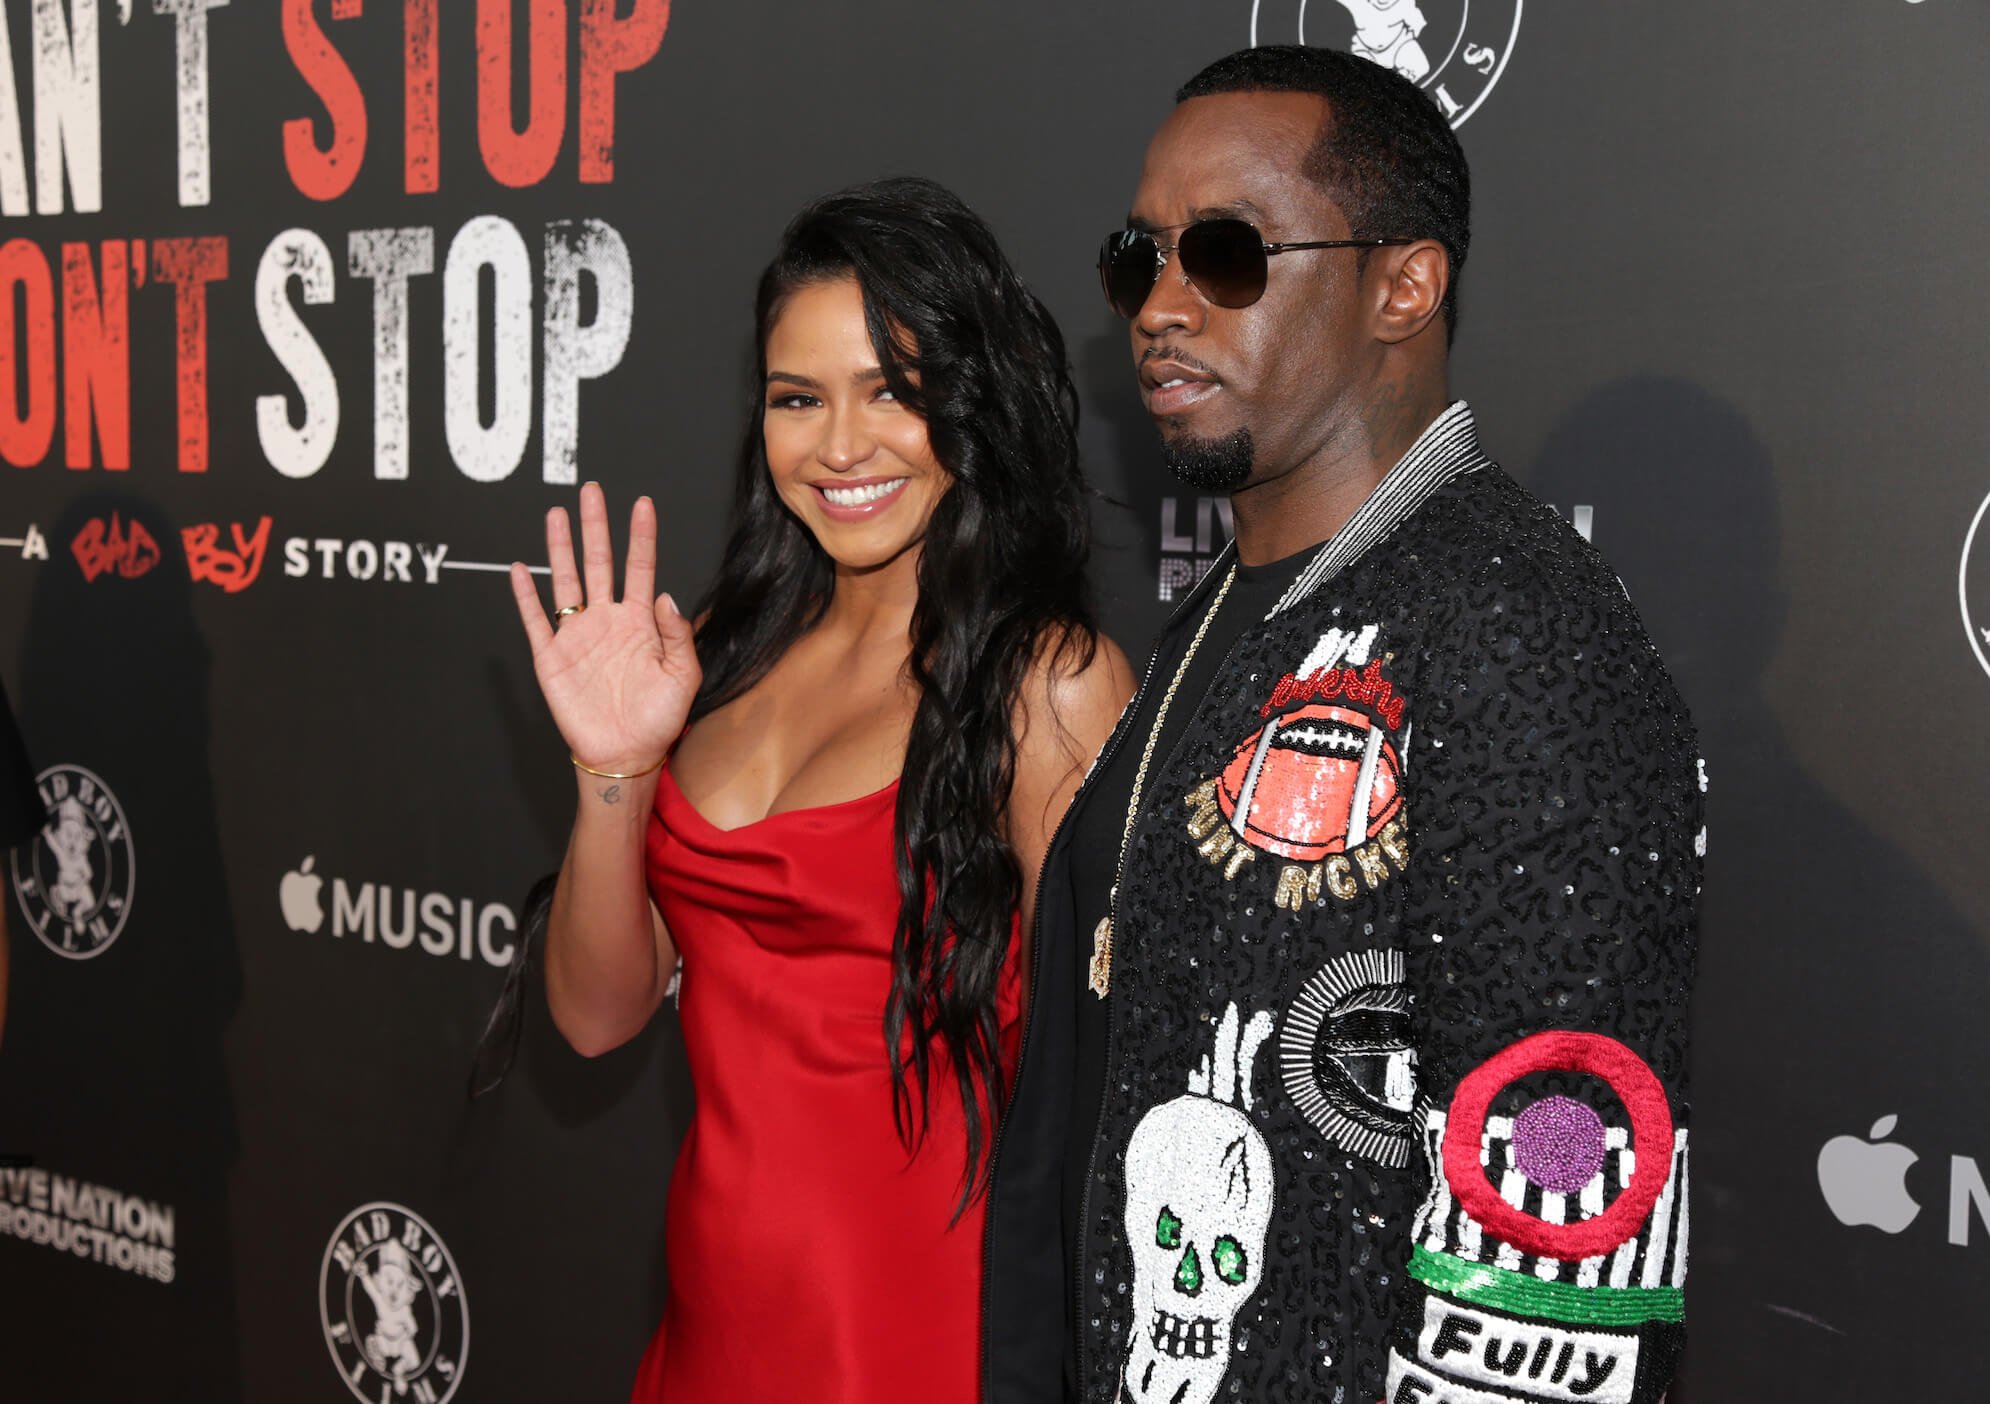 Casandra 'Cassie' Ventura smiling and waving while next to Sean 'P. Diddy' Combs in 2017